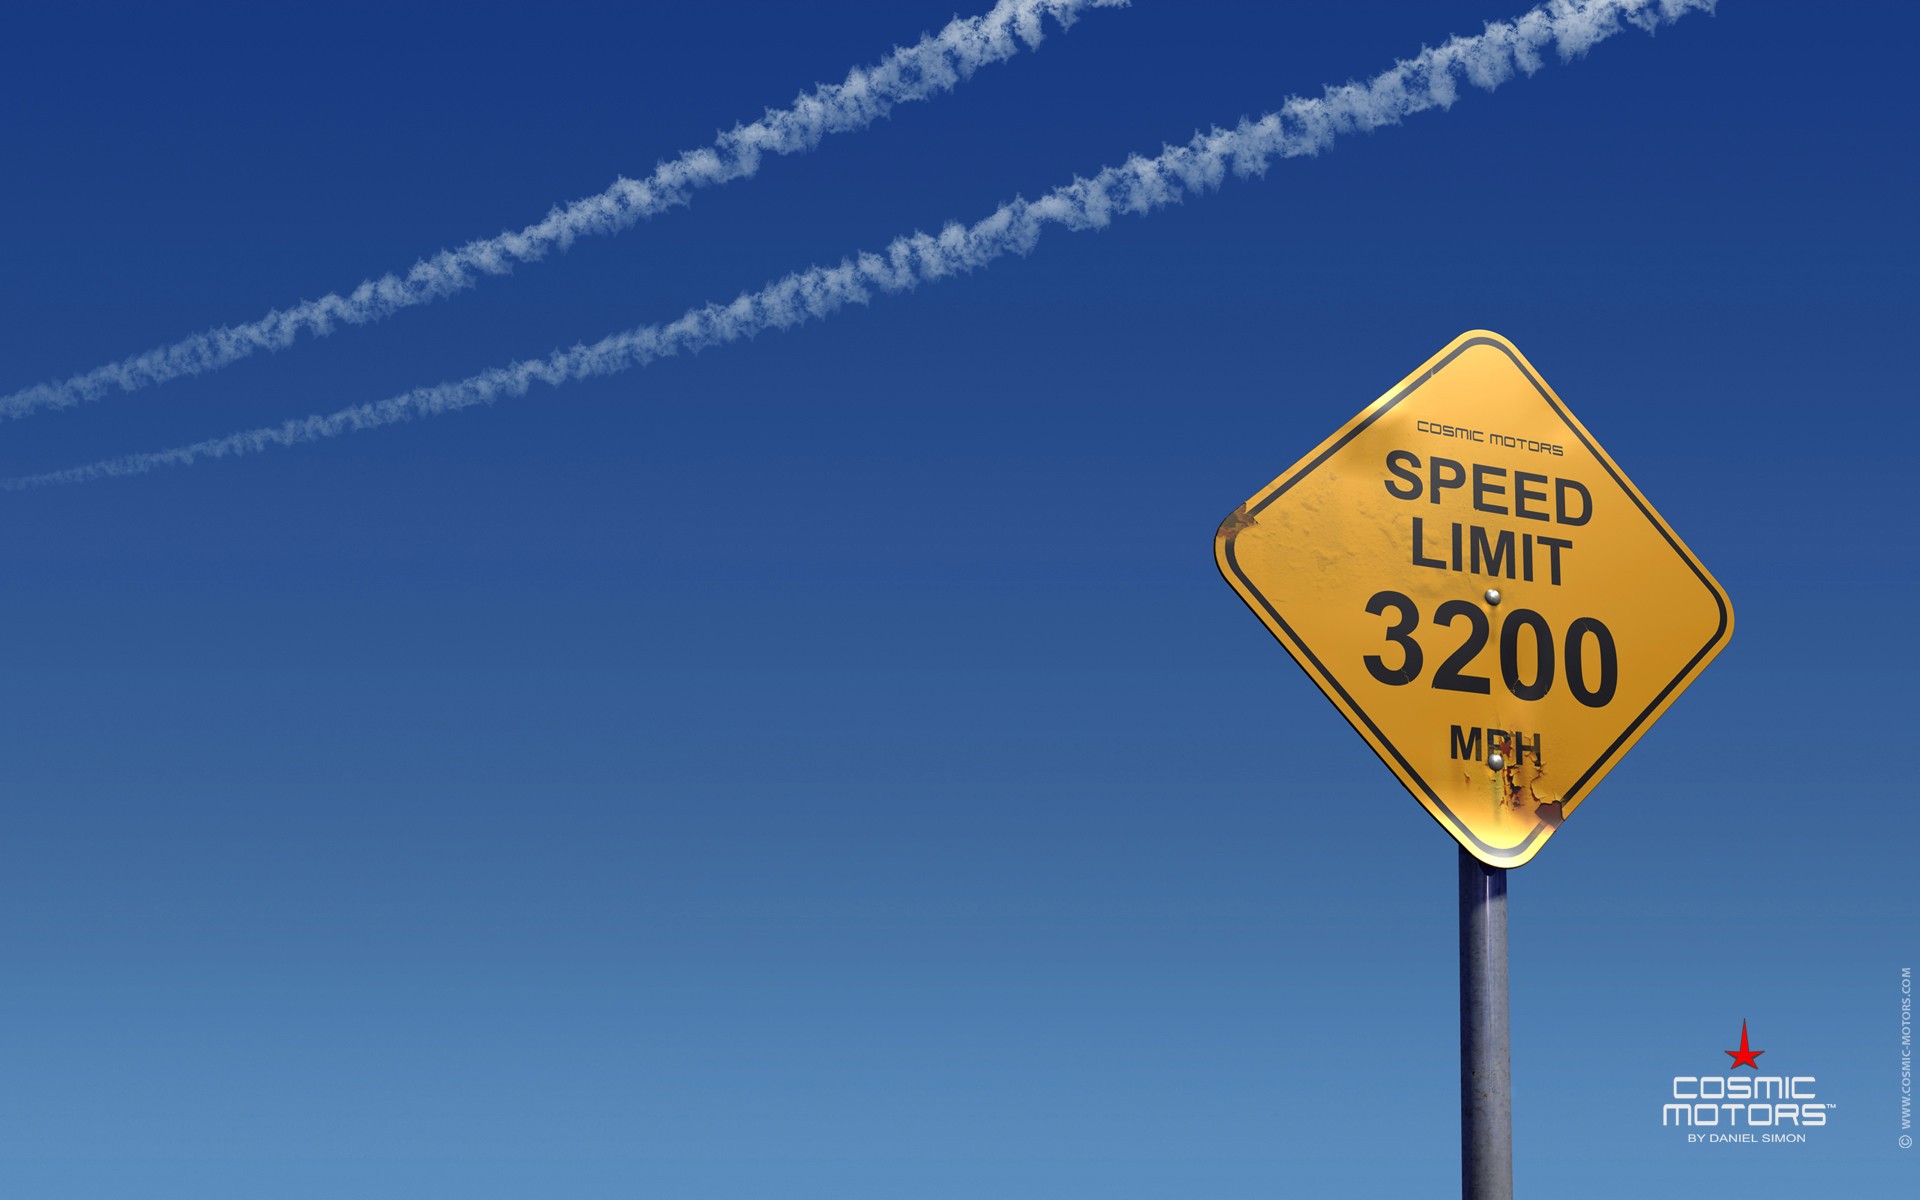 warning signs, Road sign, Signs, Cosmic Motors, Contrails, Clear sky, Blue background, Minimalism, Speed limit, Numbers Wallpaper